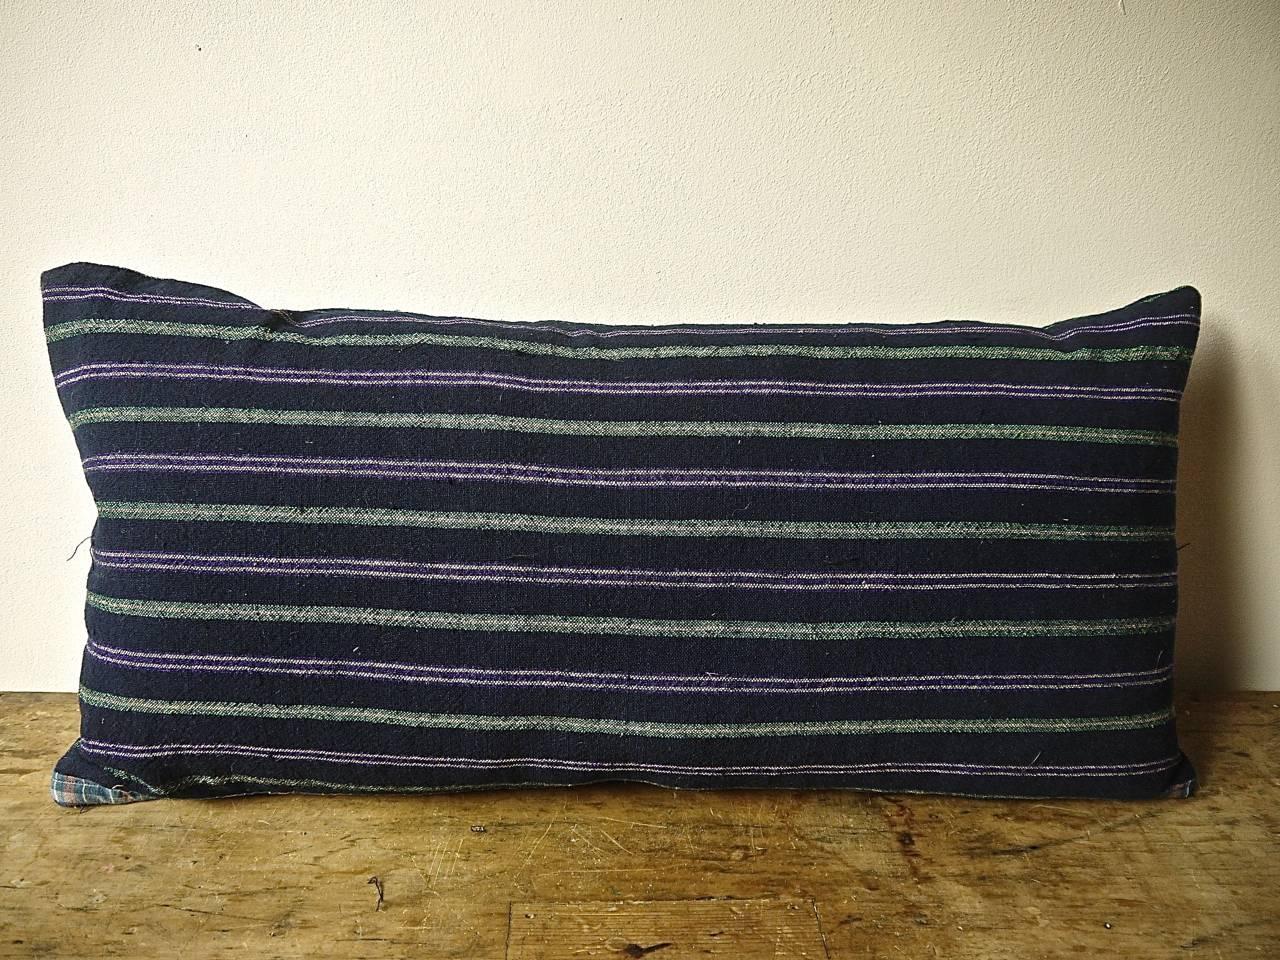 French 19th century woven cotton and wool striped cushion. Dark indigo with white, green and purple colors in a pleasing combination. With an 'as found ' border of a French 19th century cotton check trim at the base of the cushion. Backed in a